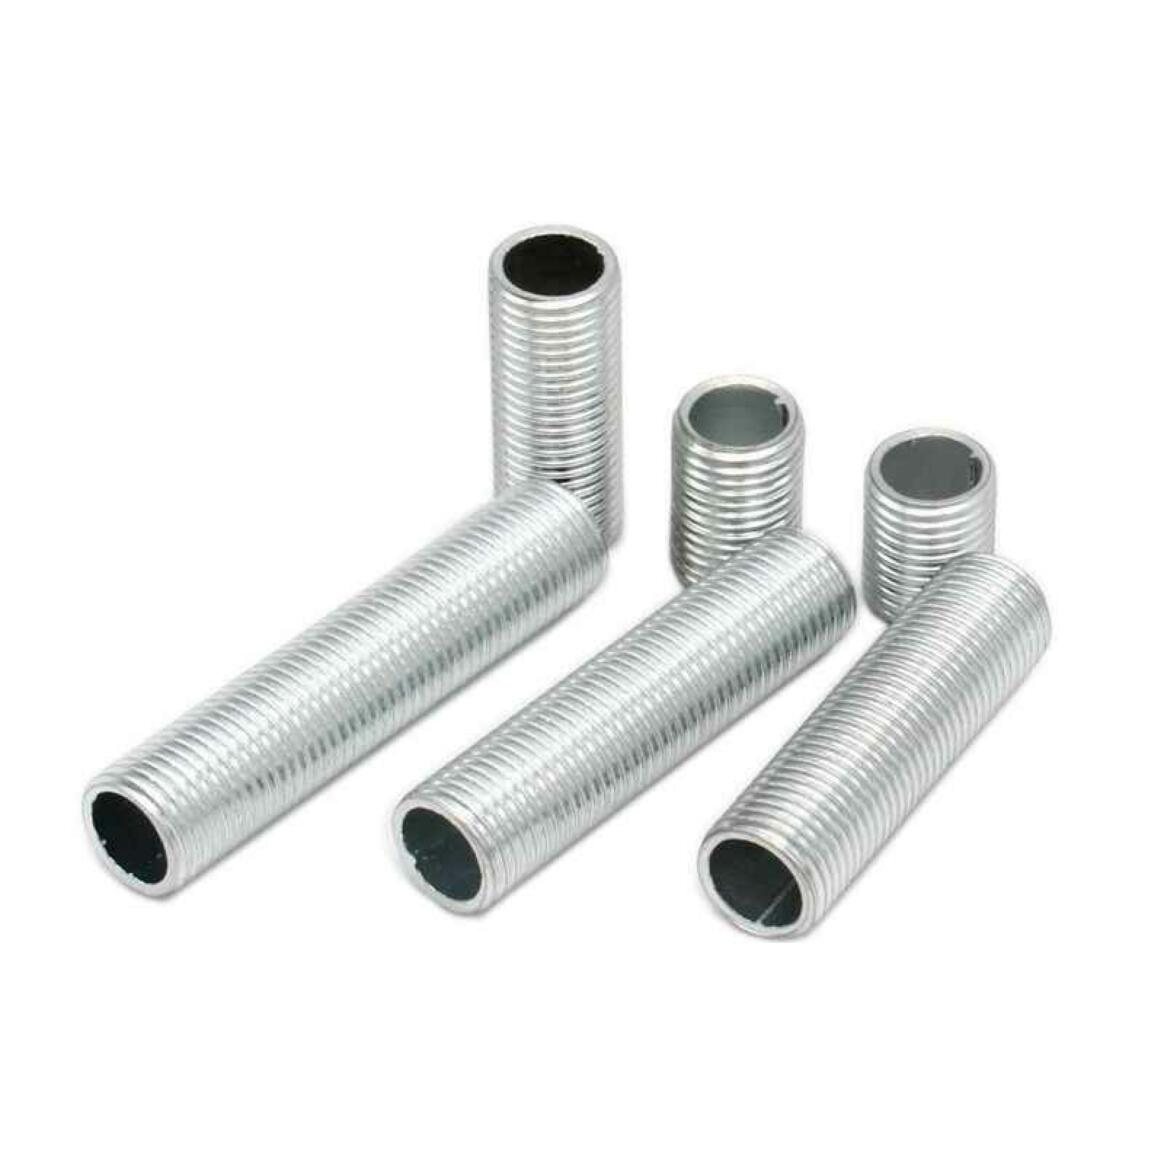 Zinc Plated All Thread Pipe Nipple M10, 10mm to 1 Metre in Length main product image